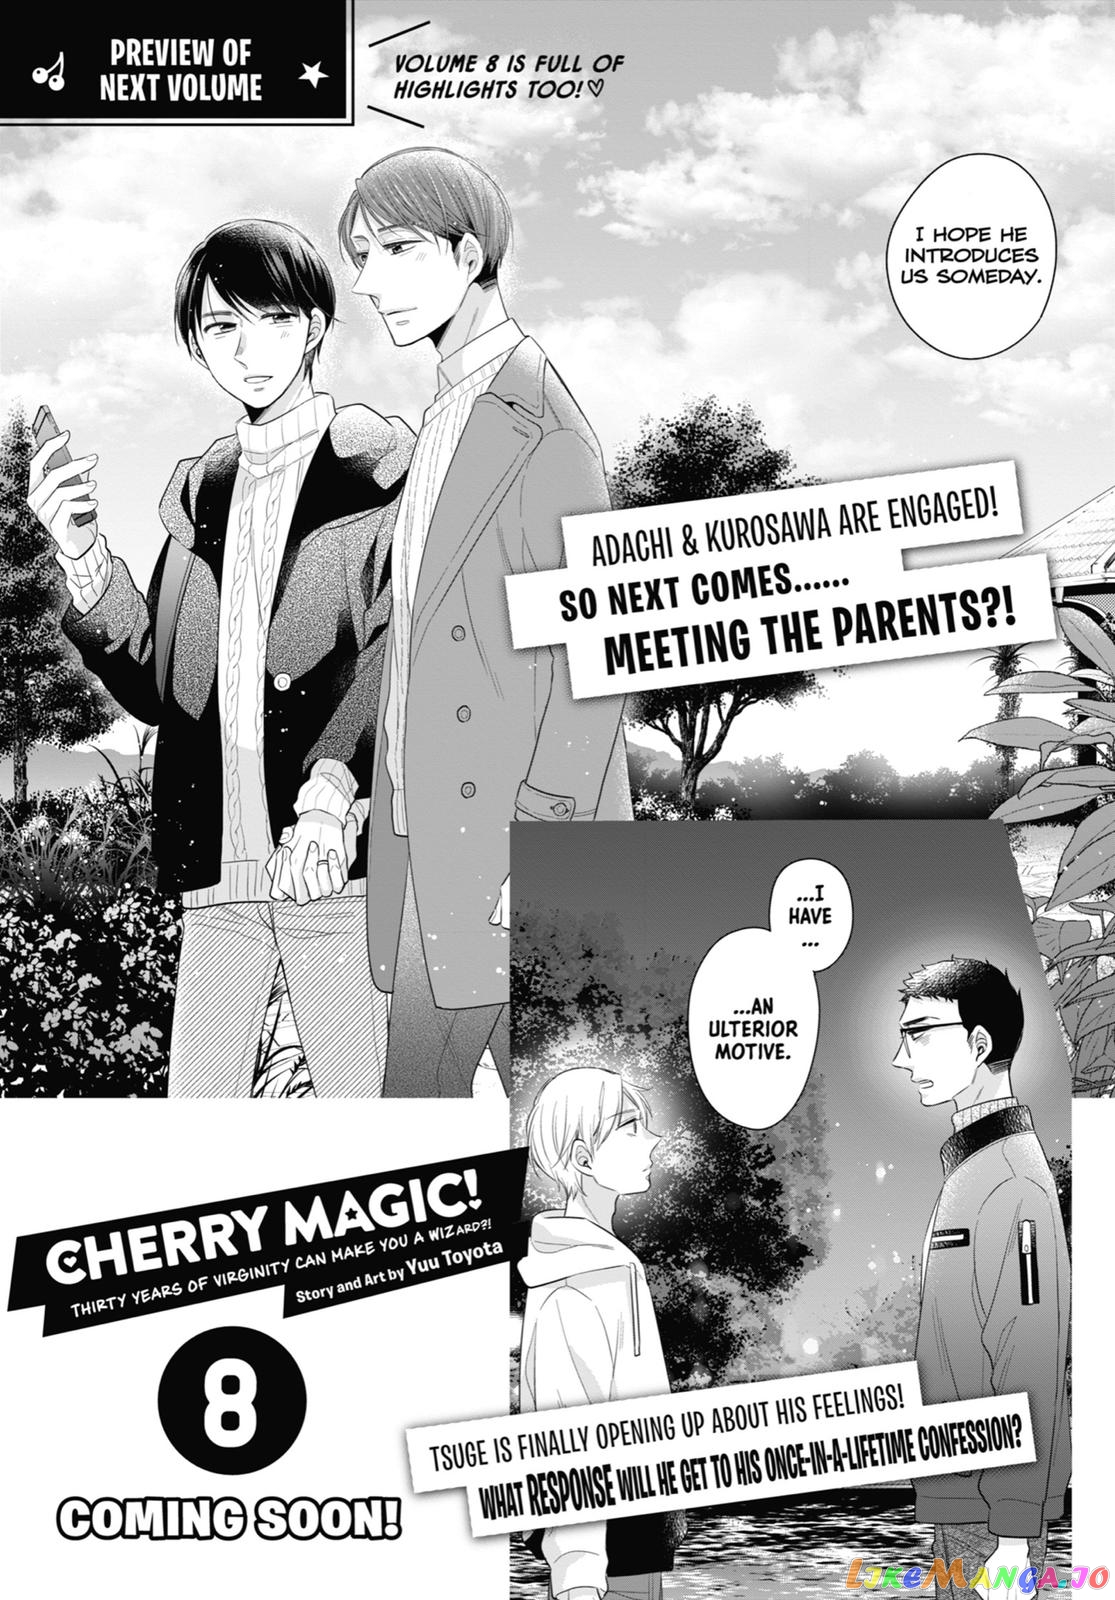 Cherry Magic! Thirty Years Of Virginity Can Make You A Wizard! chapter 38.5 - page 39